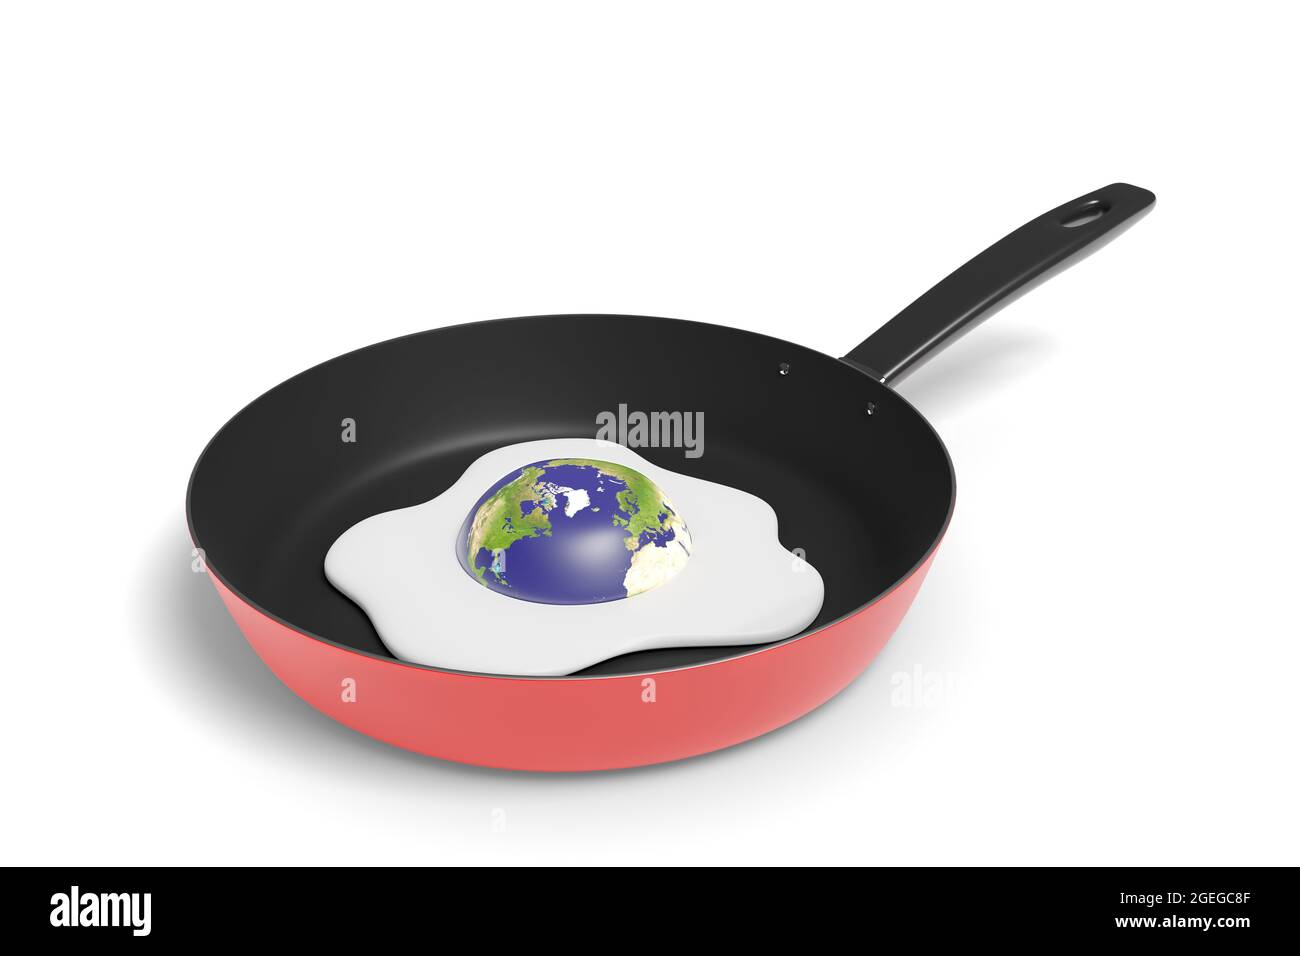 Planet earth cooking like a fried egg in a frying pan isolated on white background. Global warming concept. 3d illustration. Stock Photo